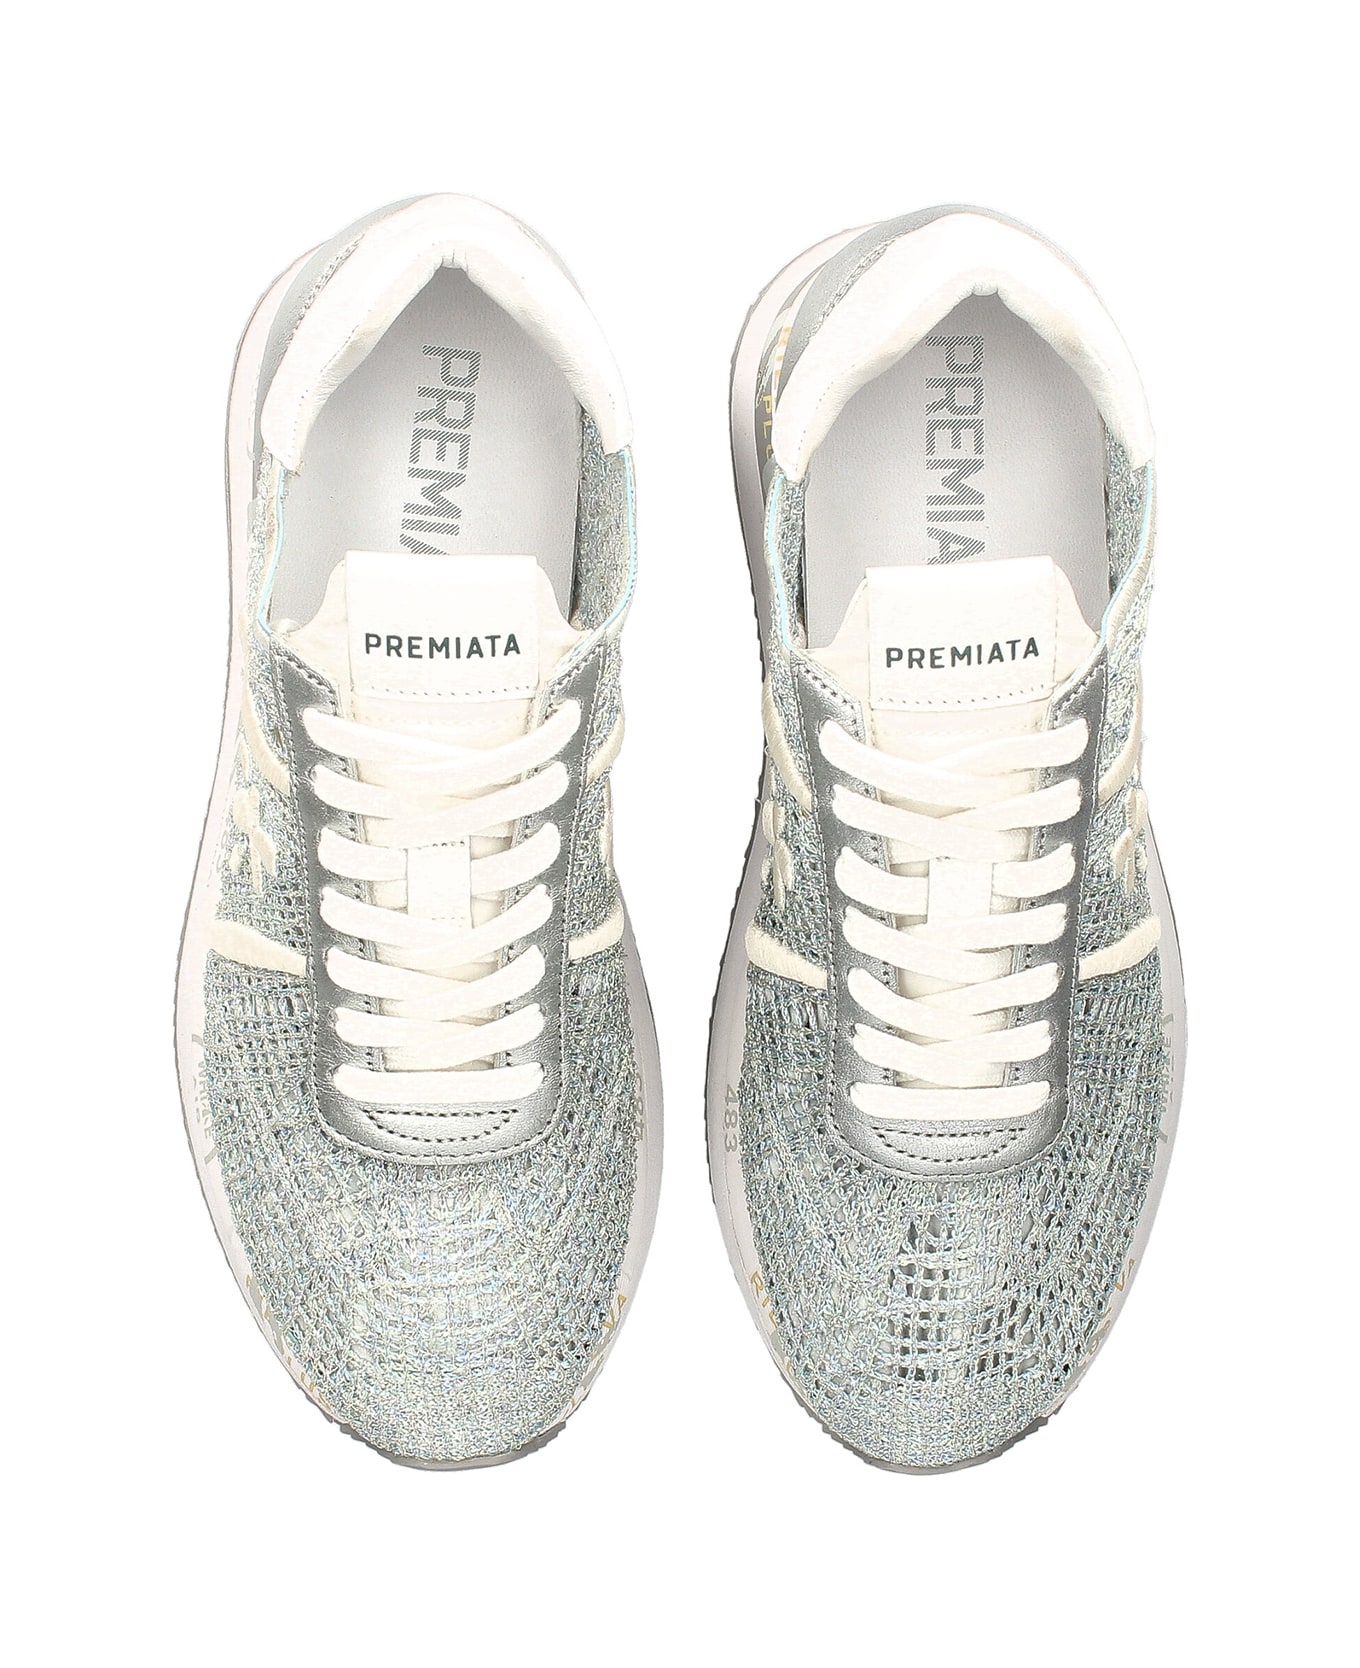 Premiata Conny 6702 Perforated Sneaker - SILVER